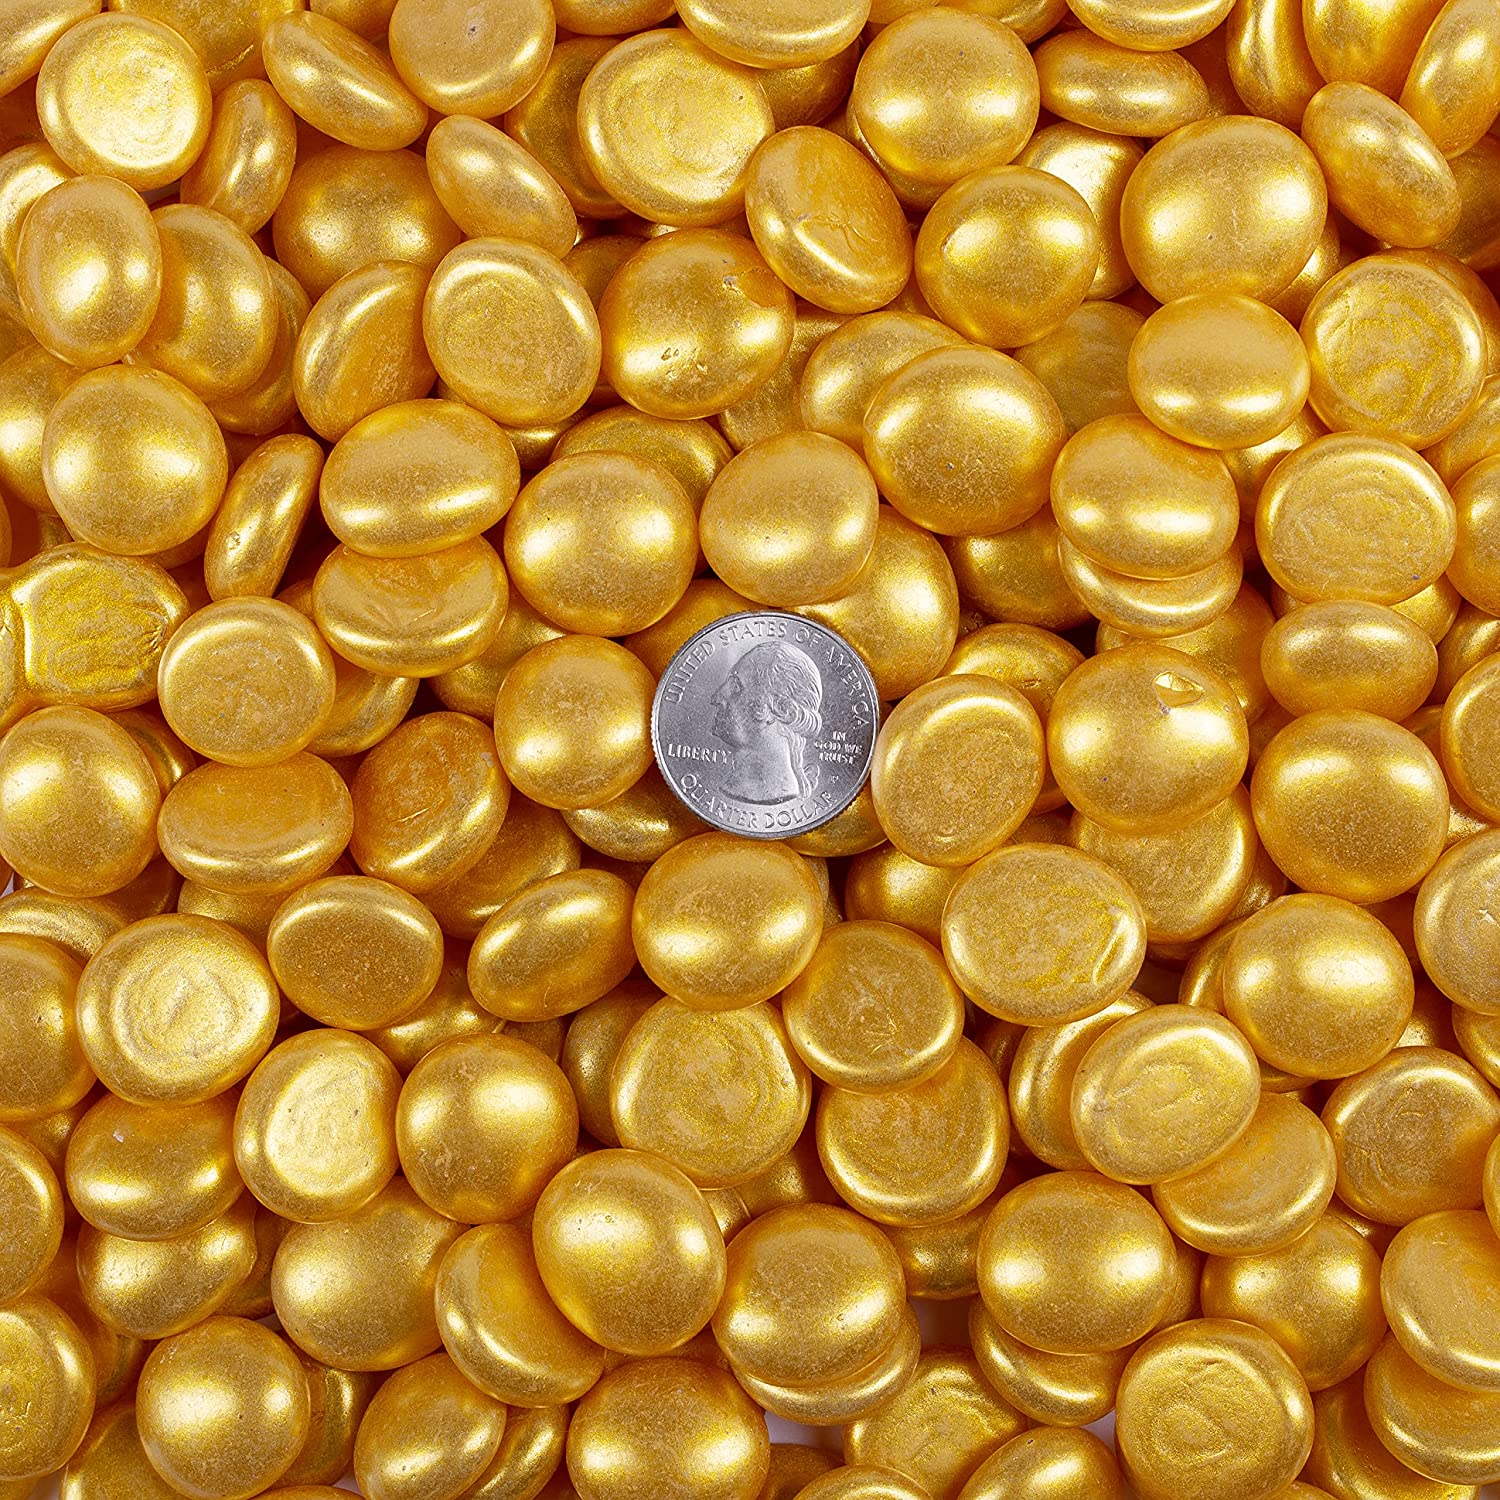 Galashield Gold Flat Glass Marbles for Vases Glass Gems Beads Pebbles Vase Filler 5 LBS, Approx. 450 PCS - image 5 of 7